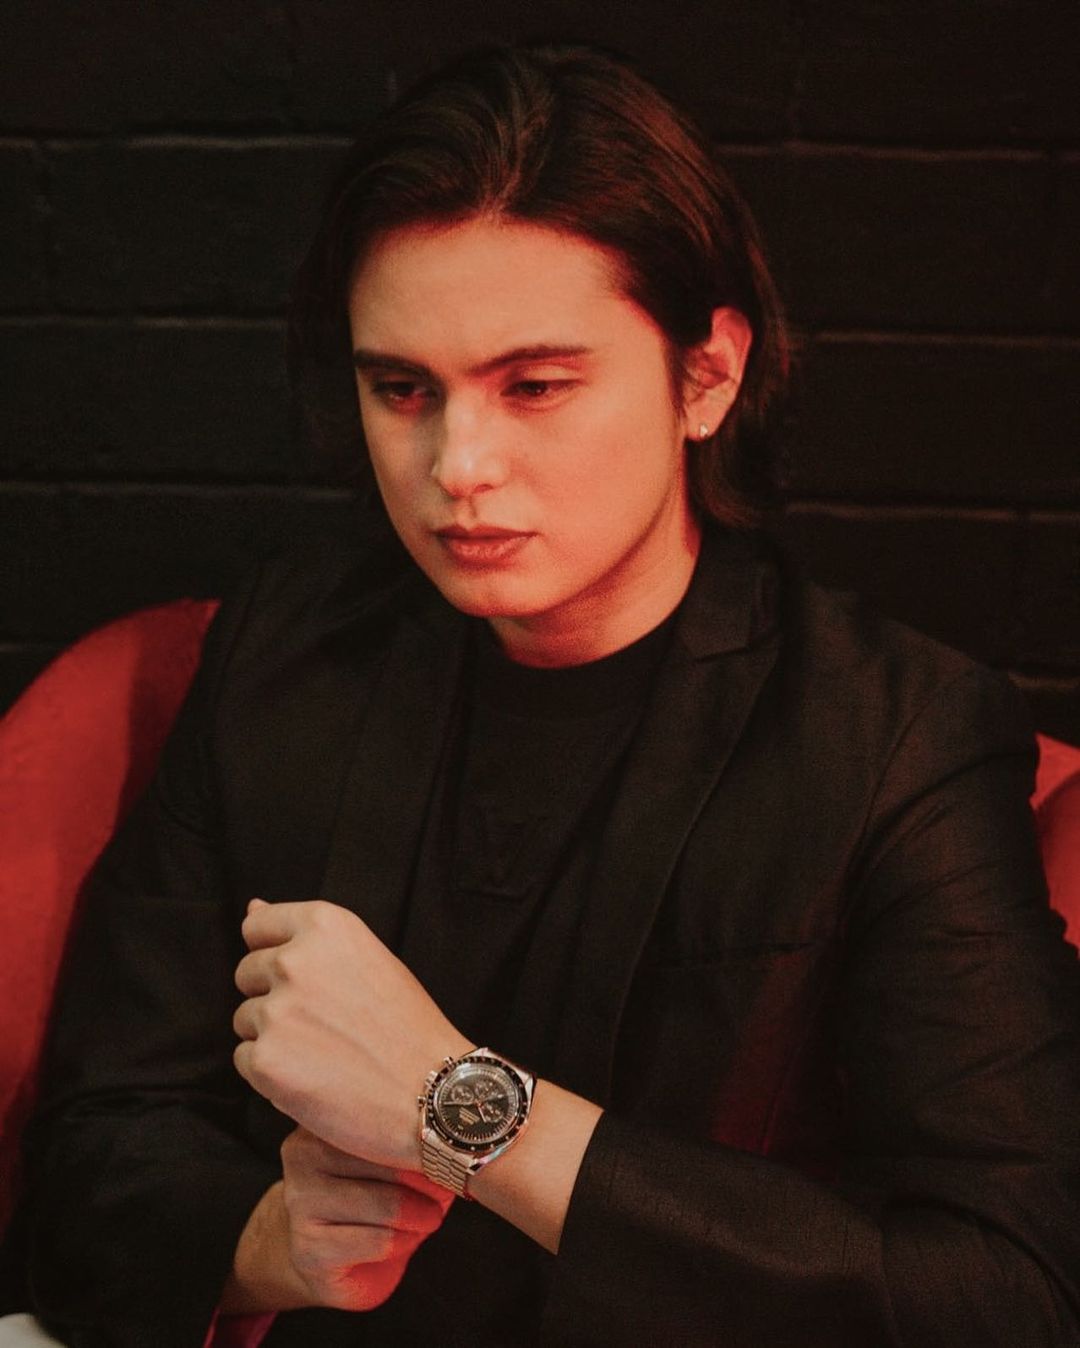 omega watches worn by local celebrity loveteams